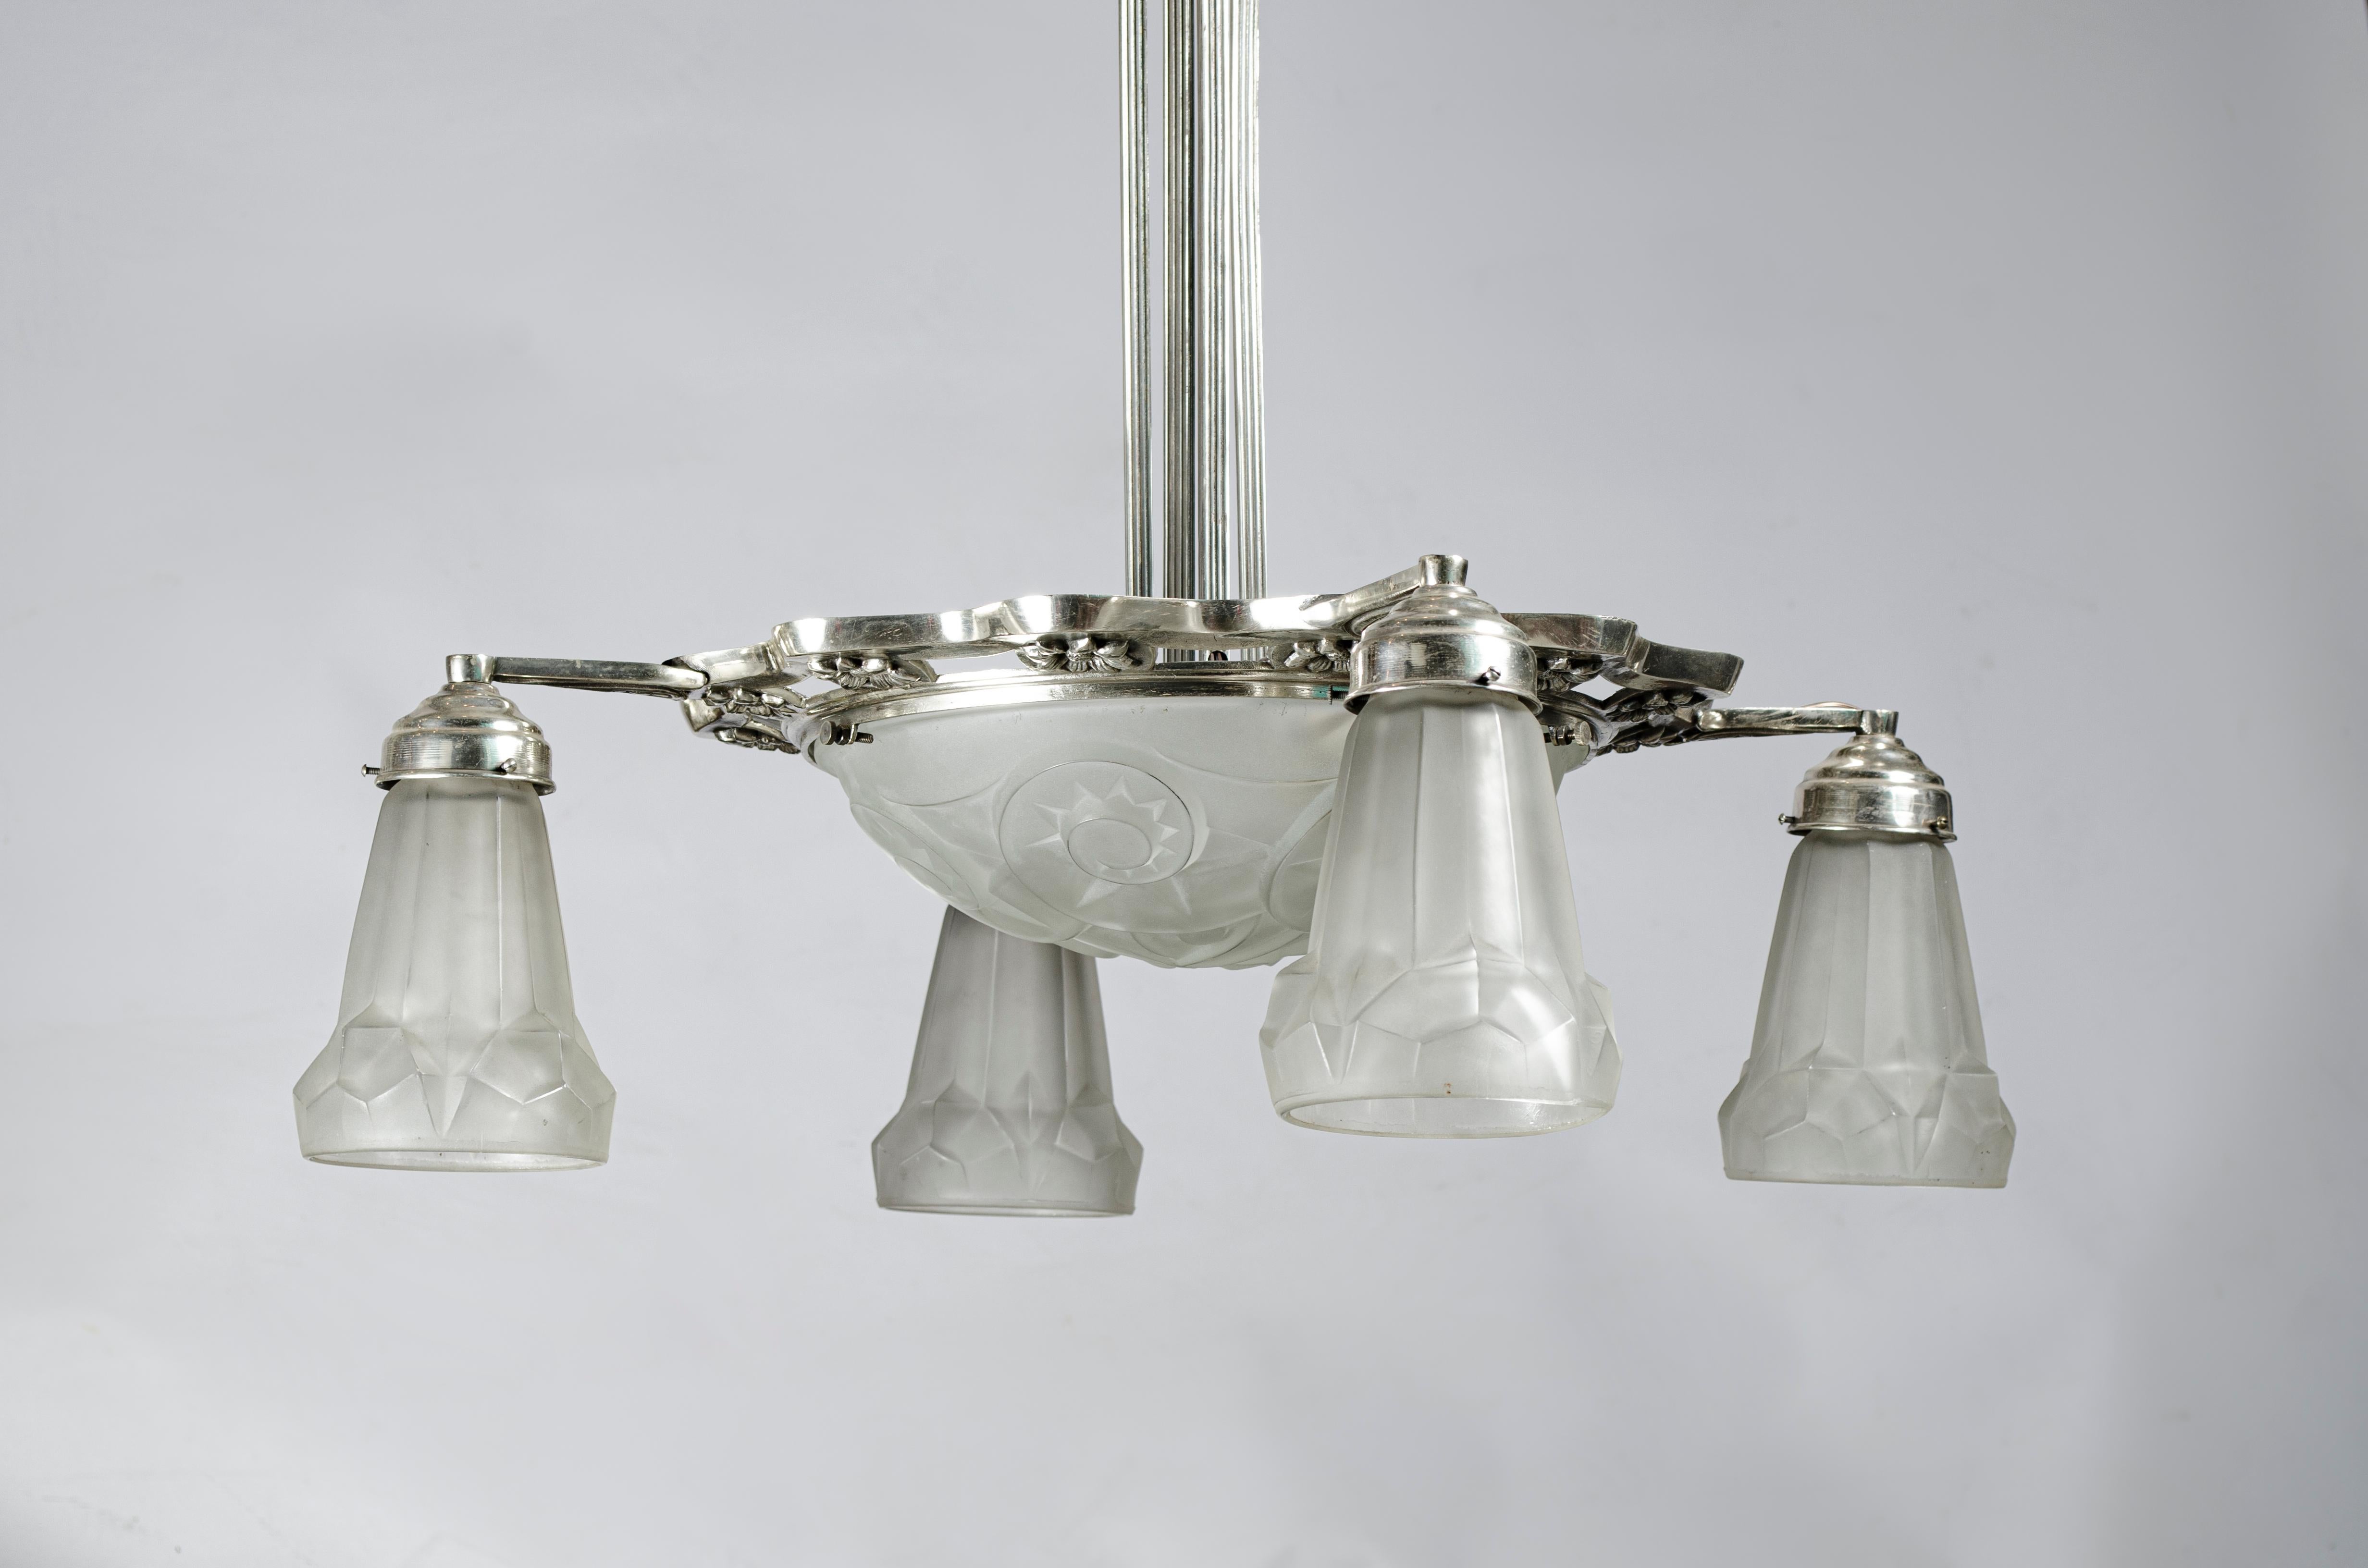 French Art Deco chandelier
Material: Electroplated bronze and pressed glass
Circa 1930 Origin France
Natural wear
Perfect condition
Electrified 220 W
4 external lights and two central lights
6 lights in total.